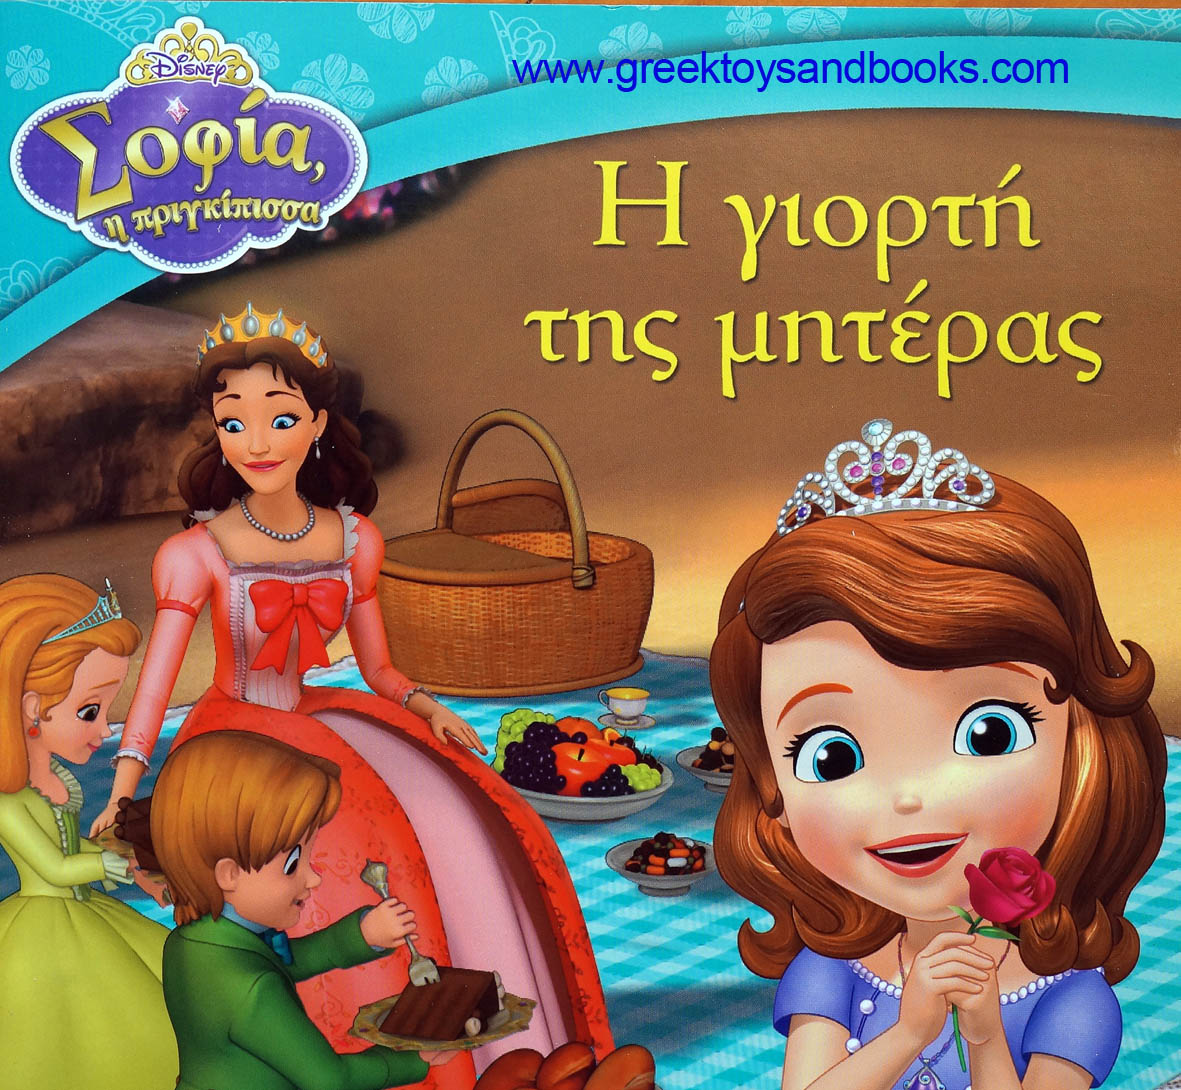 Sofia the First Book - Me and our Mum